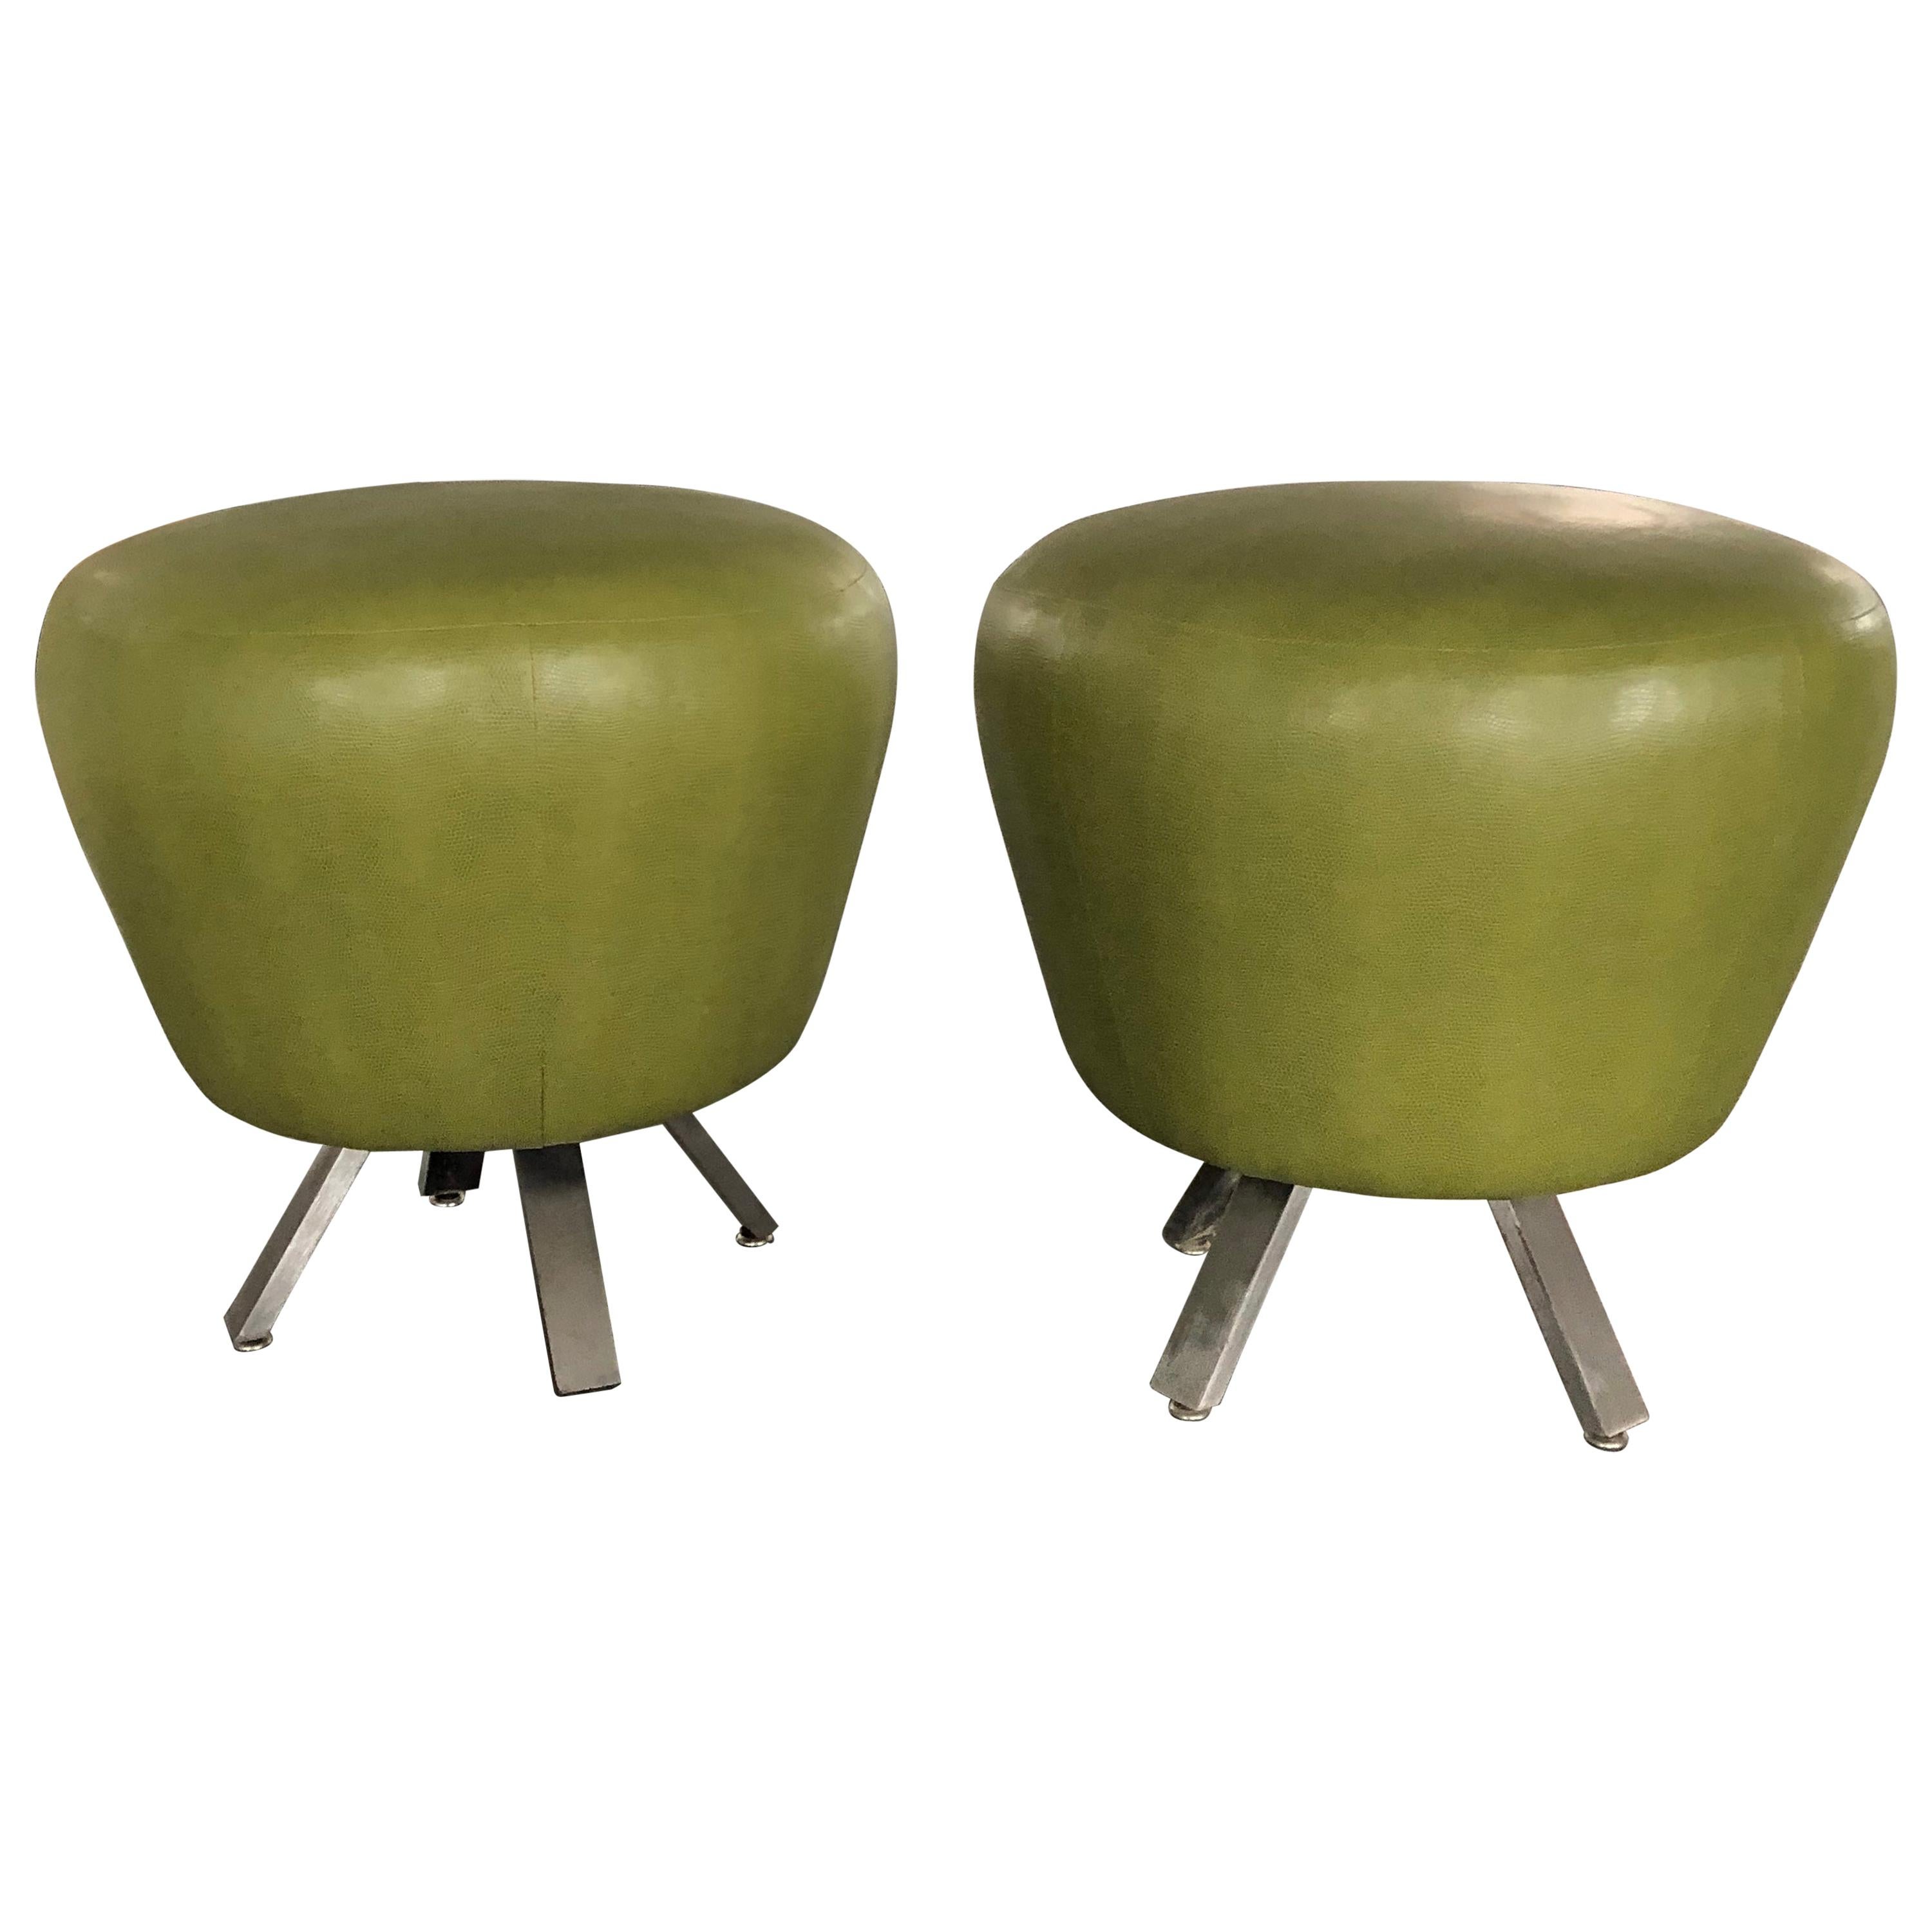 Whimsical Pair of "Gumdrop" Stools with Brushed, Splayed Aluminum Feet For Sale